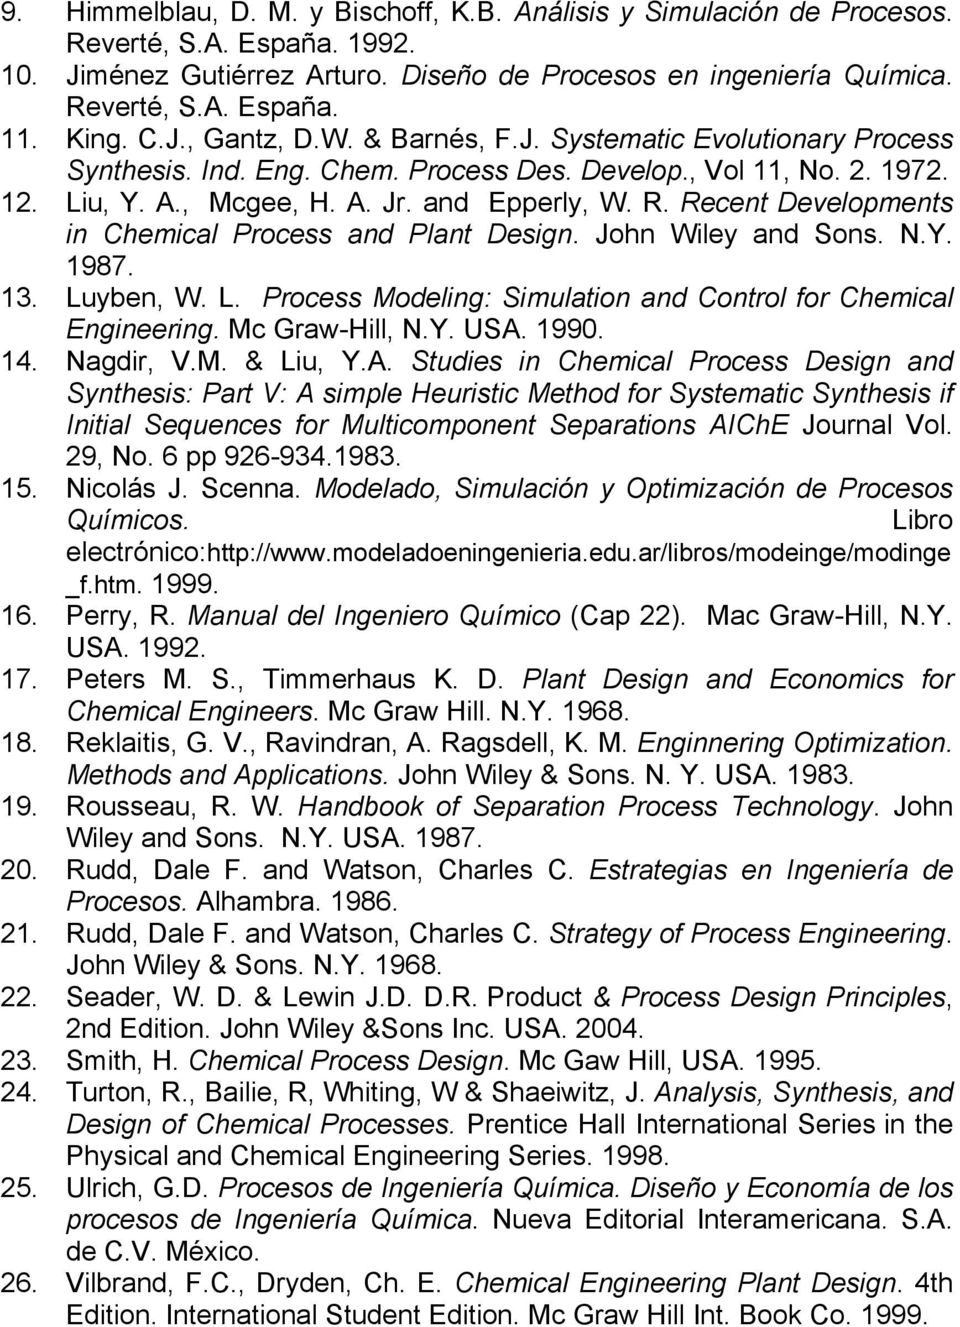 Recent Developments in Chemical Process and Plant Design. John Wiley and Sons. N.Y. 1987. 13. Luyben, W. L. Process Modeling: Simulation and Control for Chemical Engineering. Mc Graw-Hill, N.Y. USA.